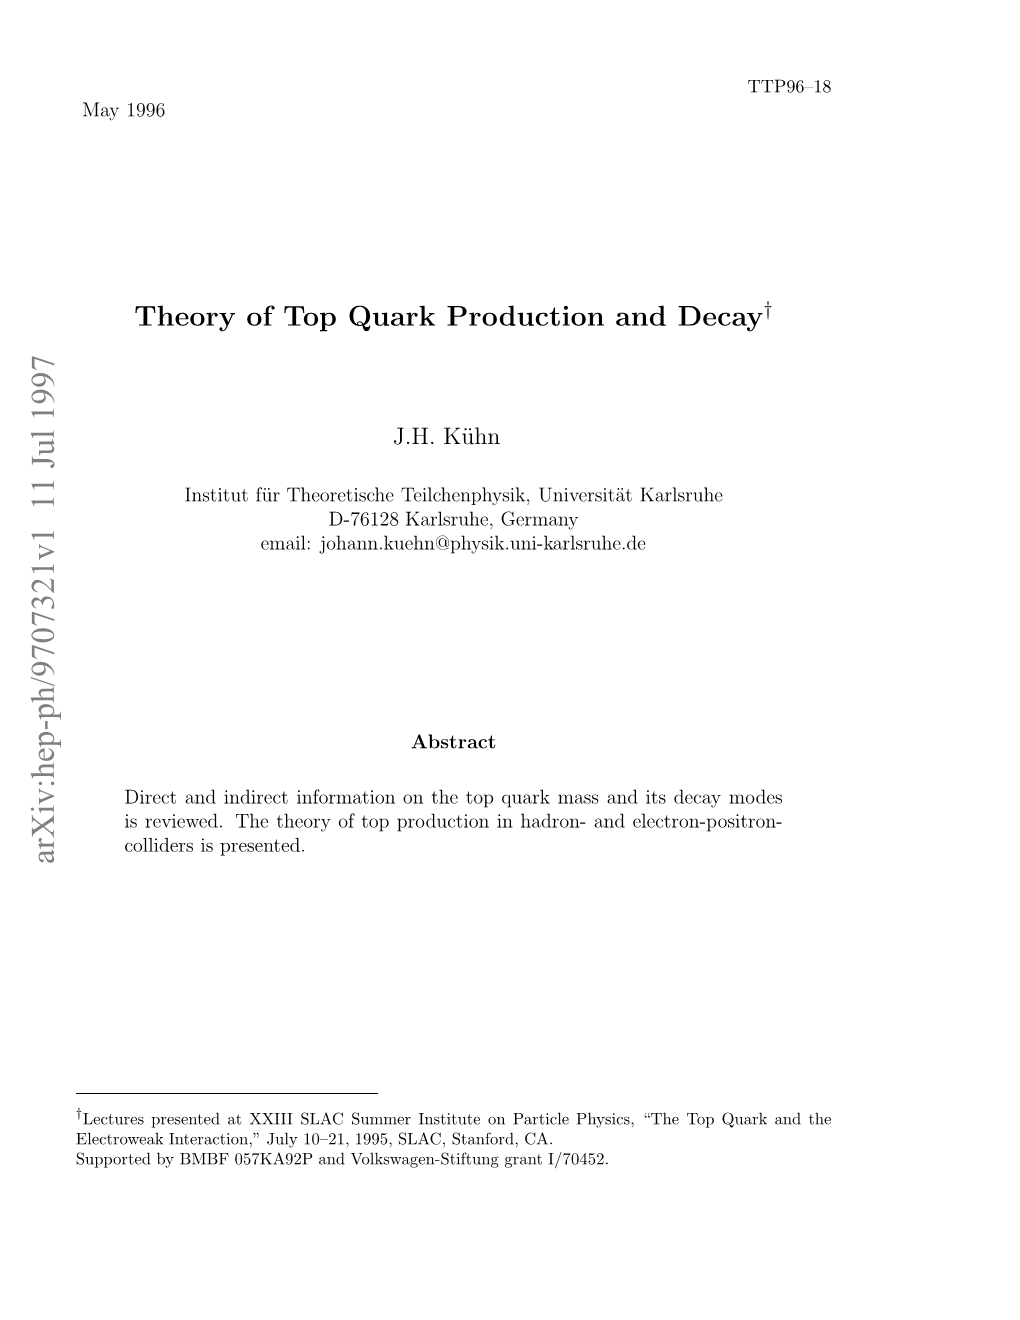 Theory of Top Quark Production and Decay